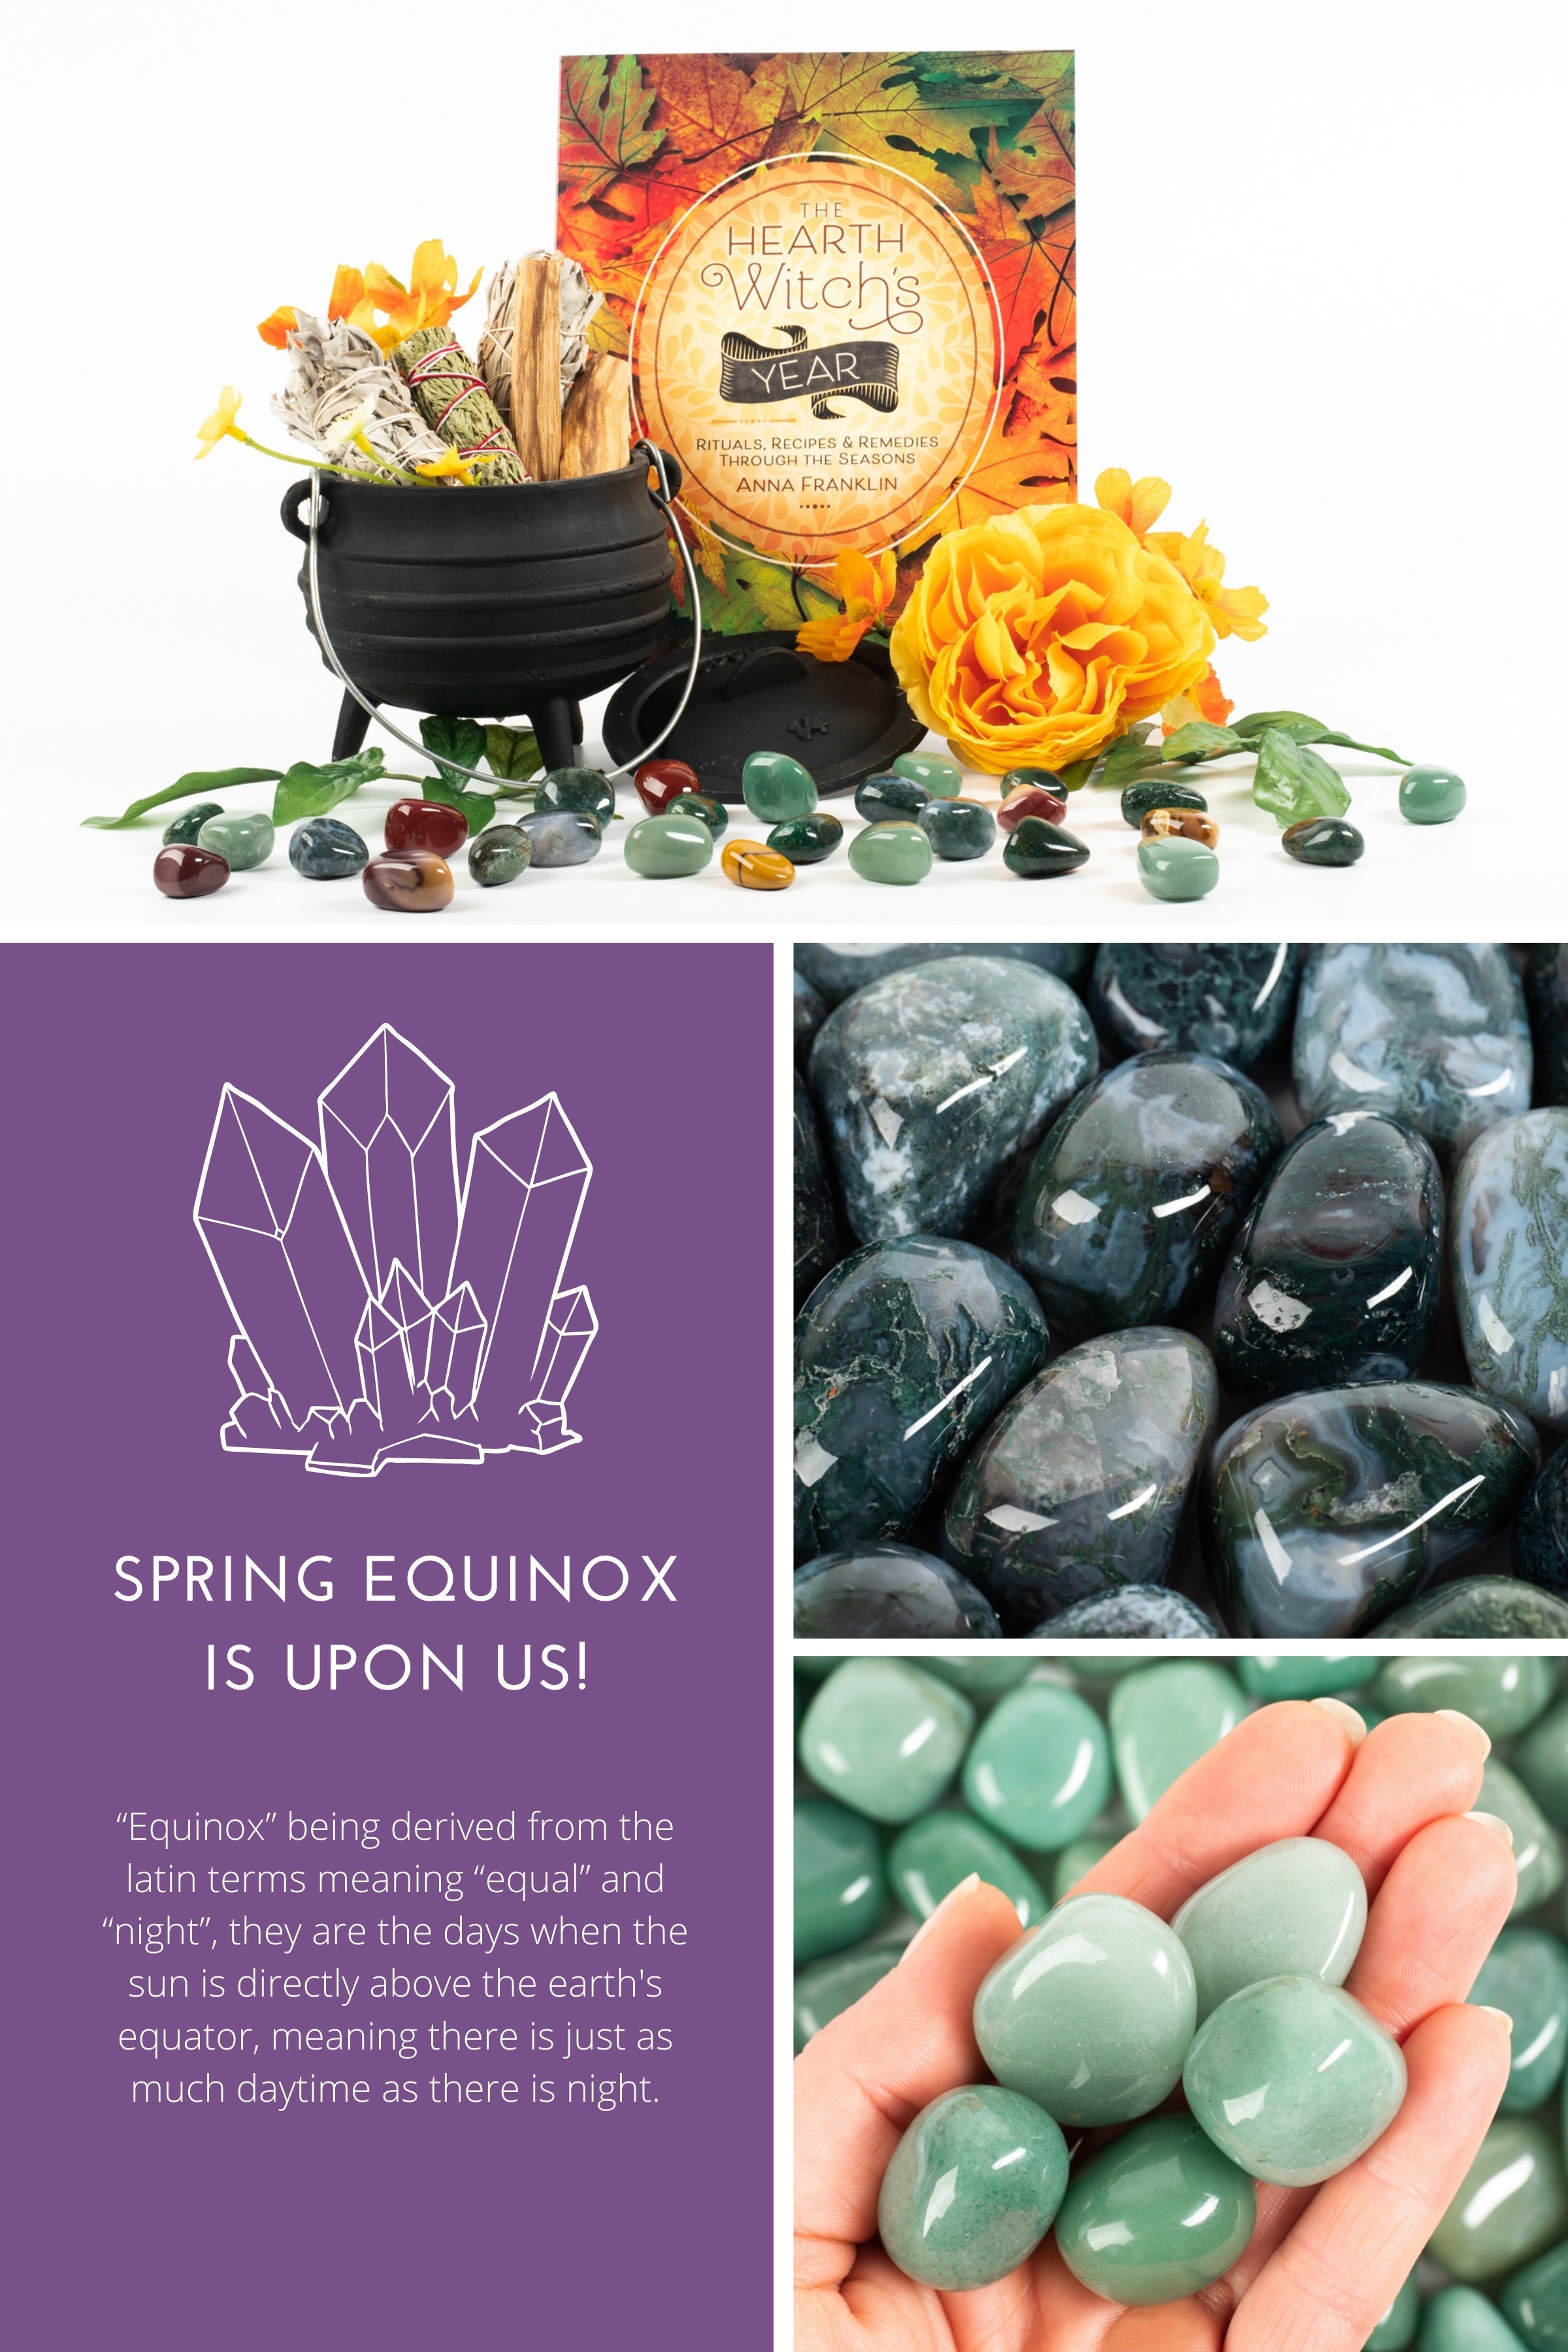 Spring Equinox is Upon Us!